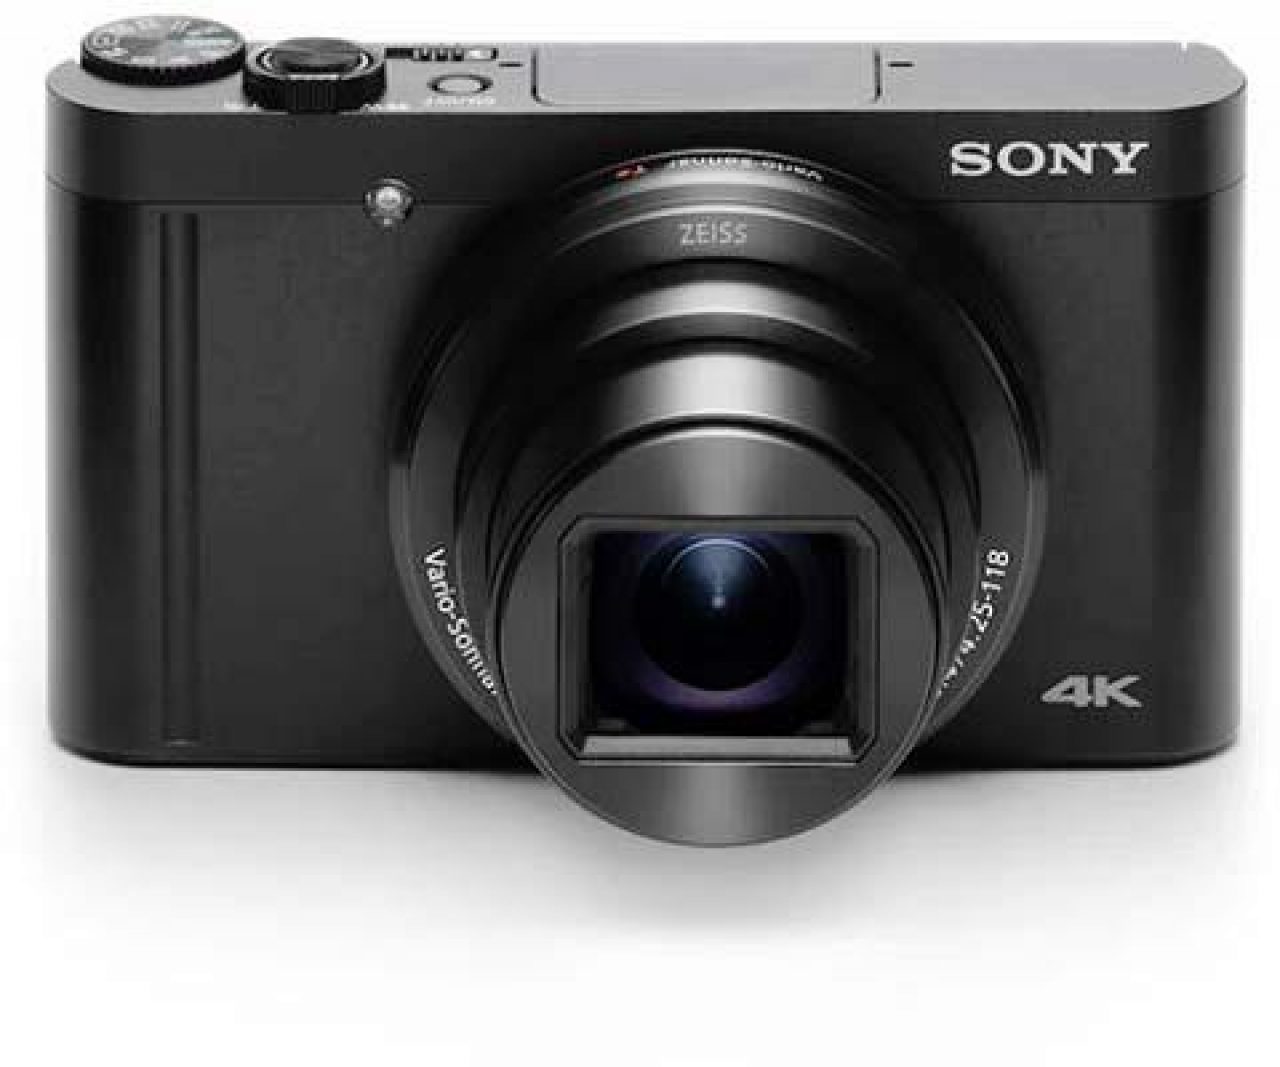 Sony Cyber-shot DSC-WX800 Camera Features 30x Zoom, 18.2